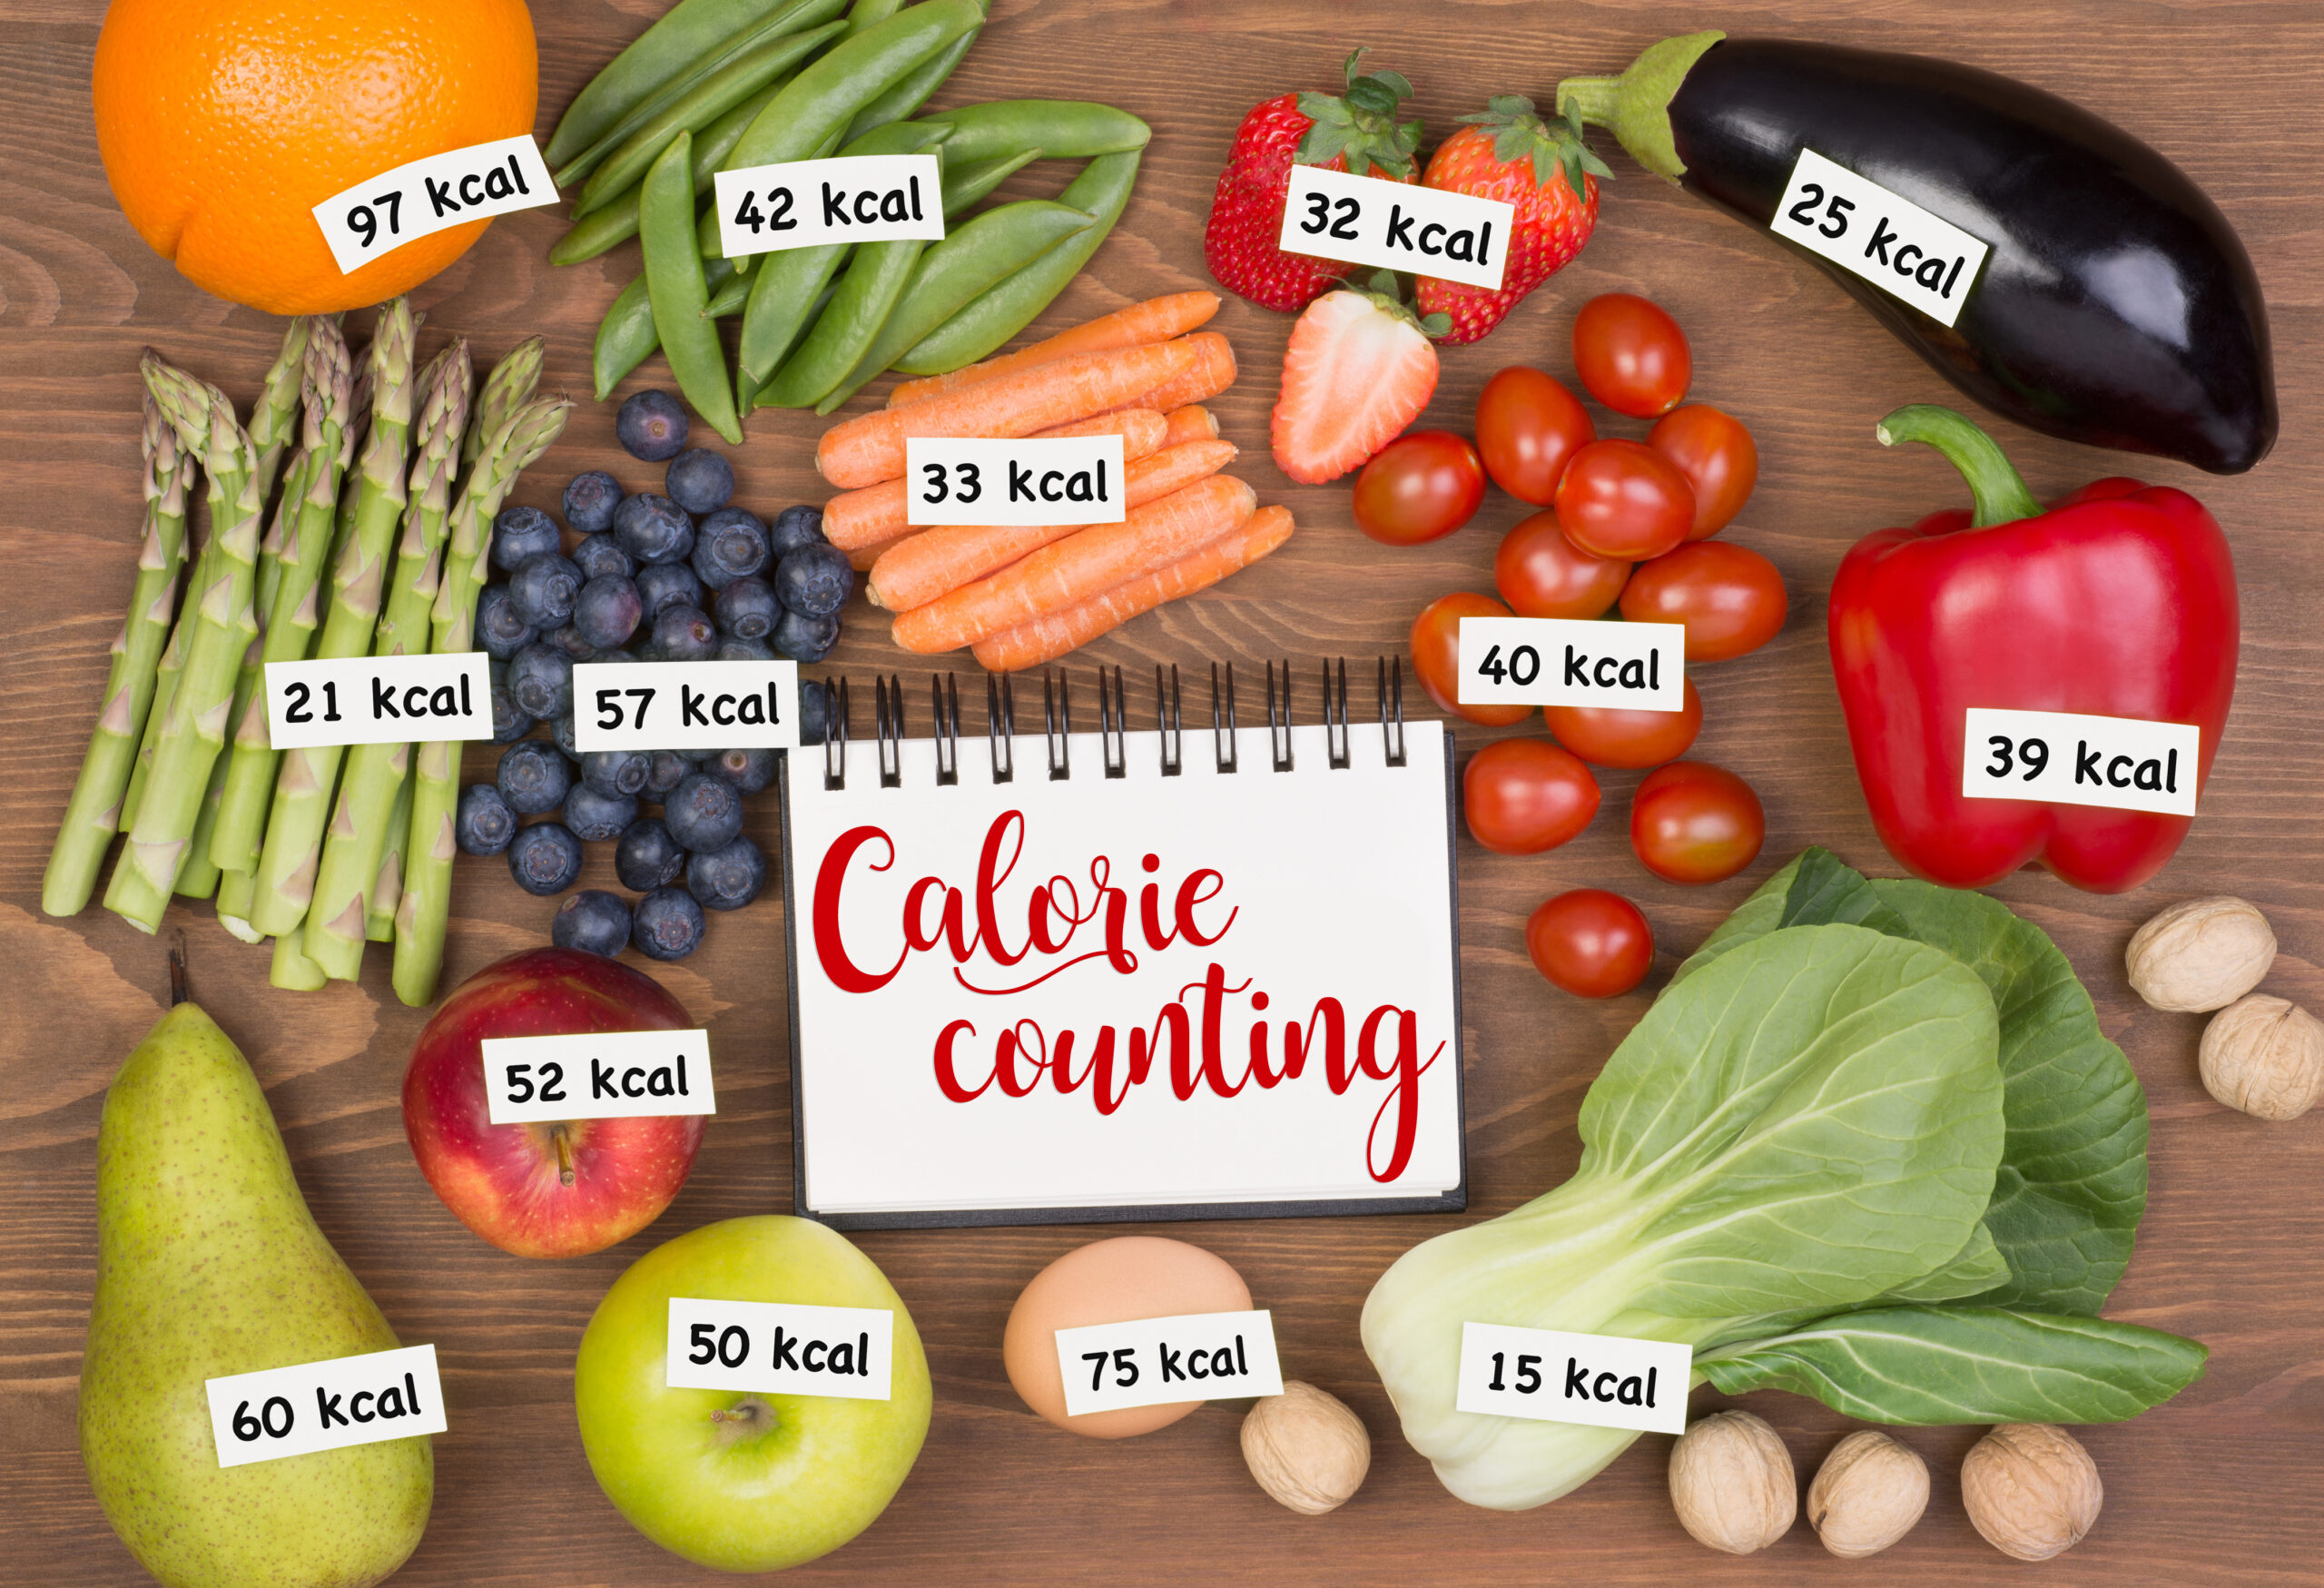 Calorie counting flaws